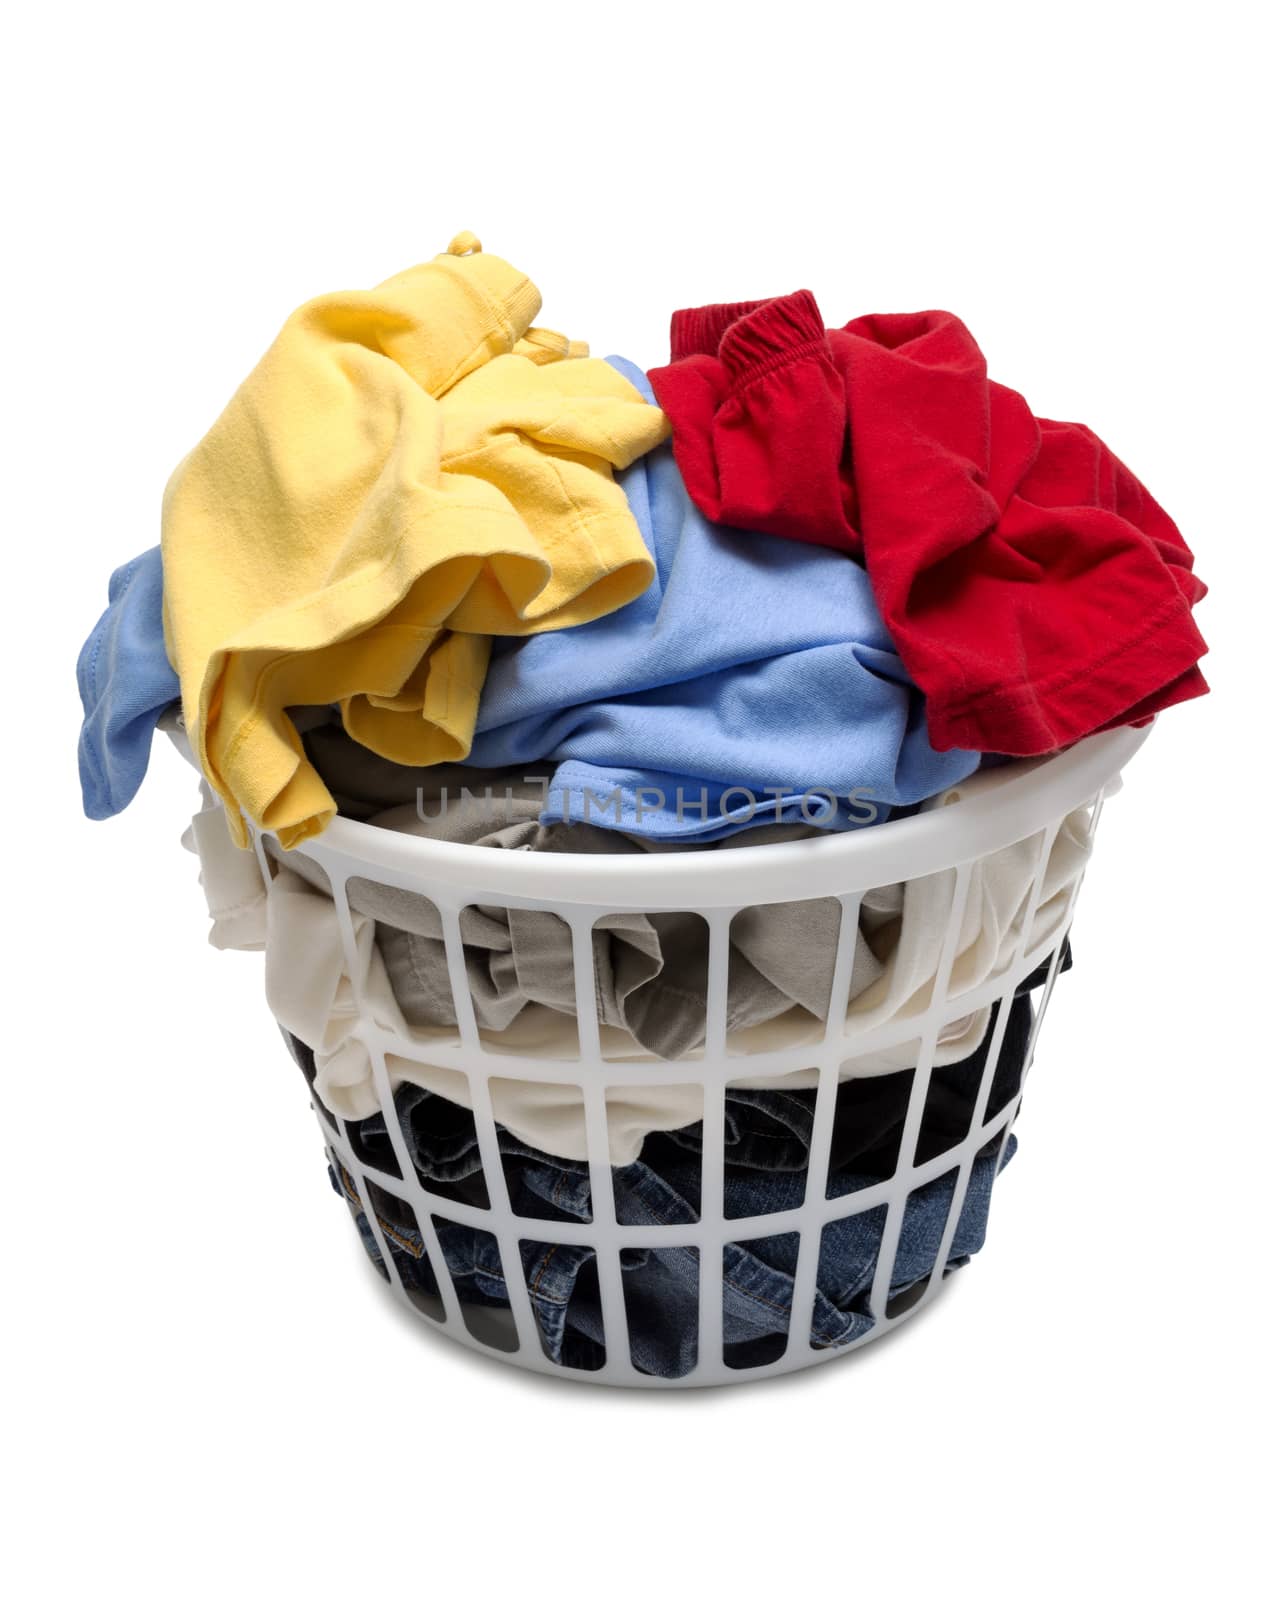 Pile Of Dirty Laundry In White Basket by stockbuster1